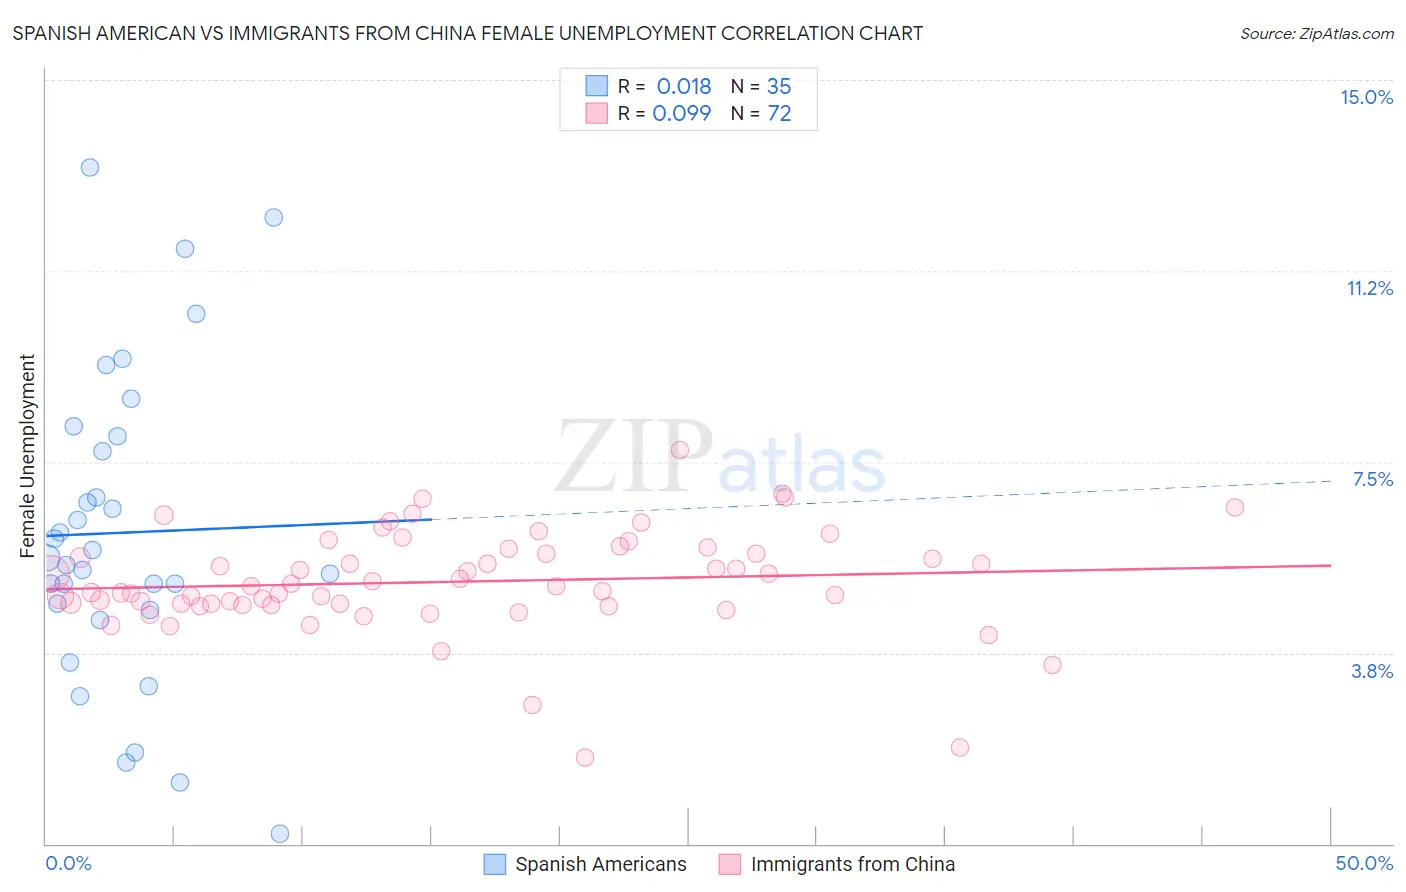 Spanish American vs Immigrants from China Female Unemployment